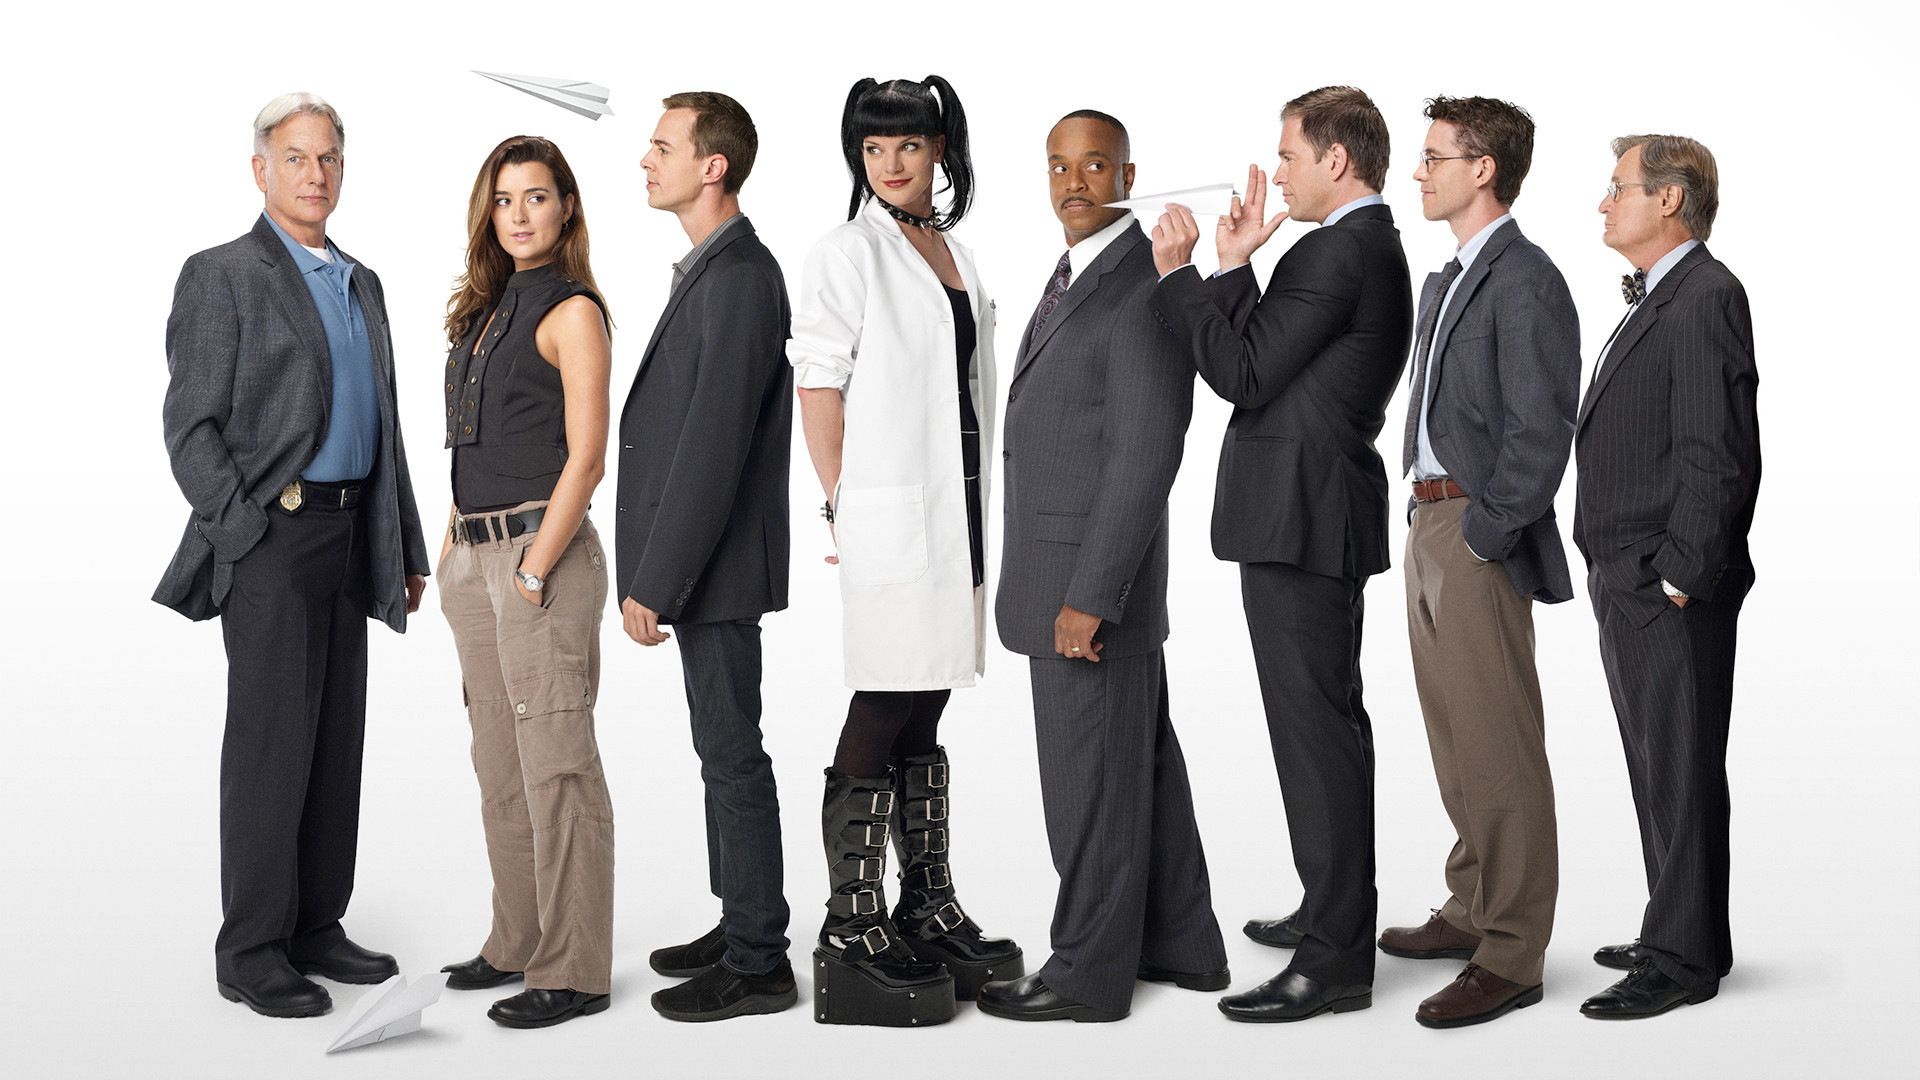 Ncis HD Wallpaper Background Image